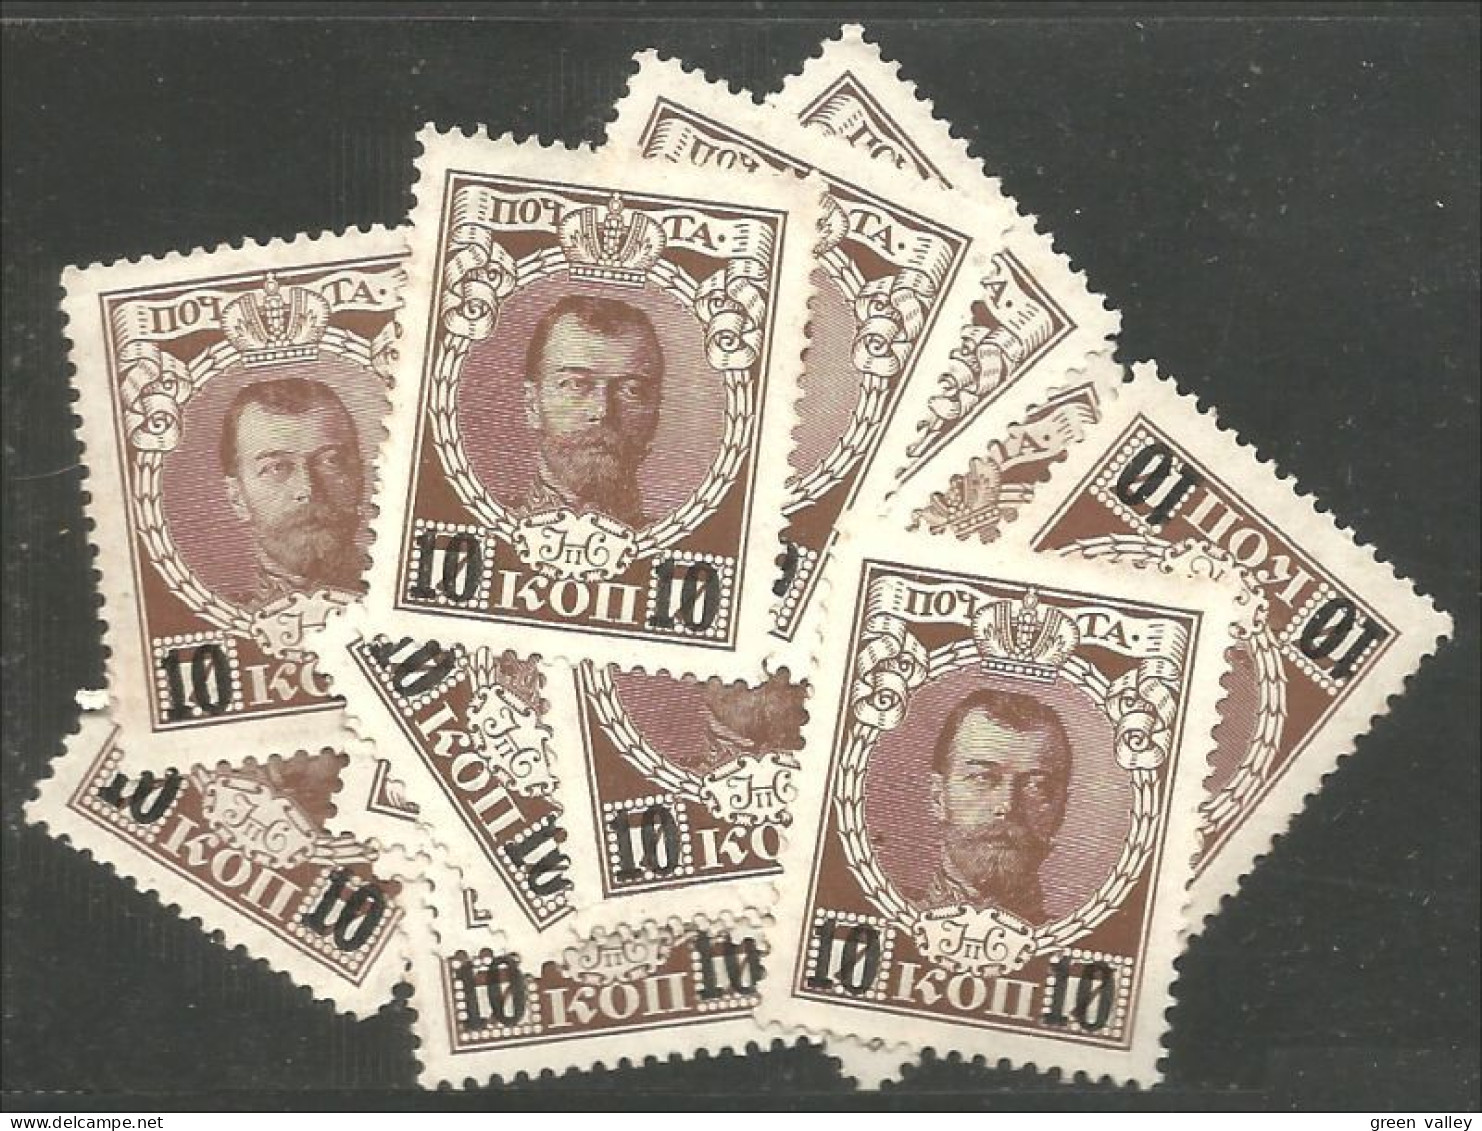 771 Russie 7k Brown 1916 15 Stamps For Study Tsar Tzar Nicholas II Surcharge 10k No Gum Sans Gomme (RUZ-372) - Used Stamps